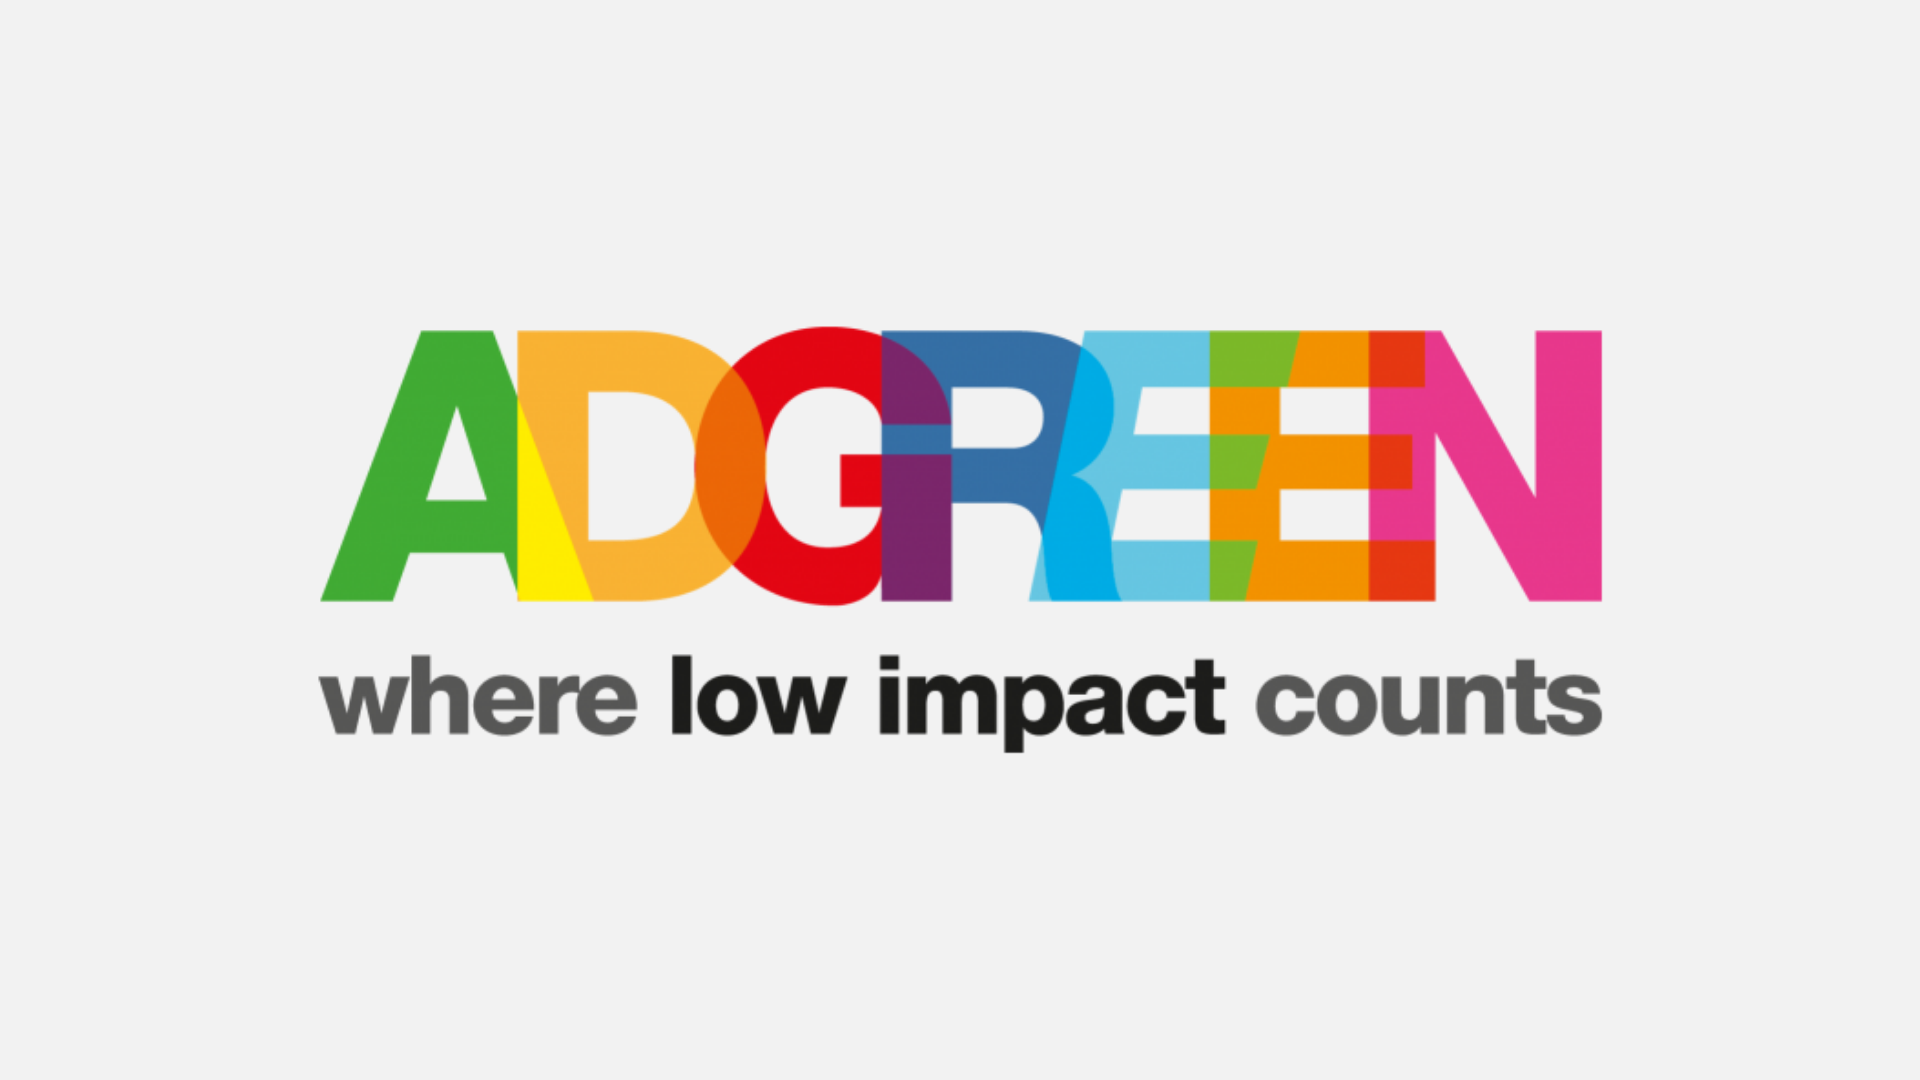 AdGreen is launched by UK advertising’s Climate Action Working Group